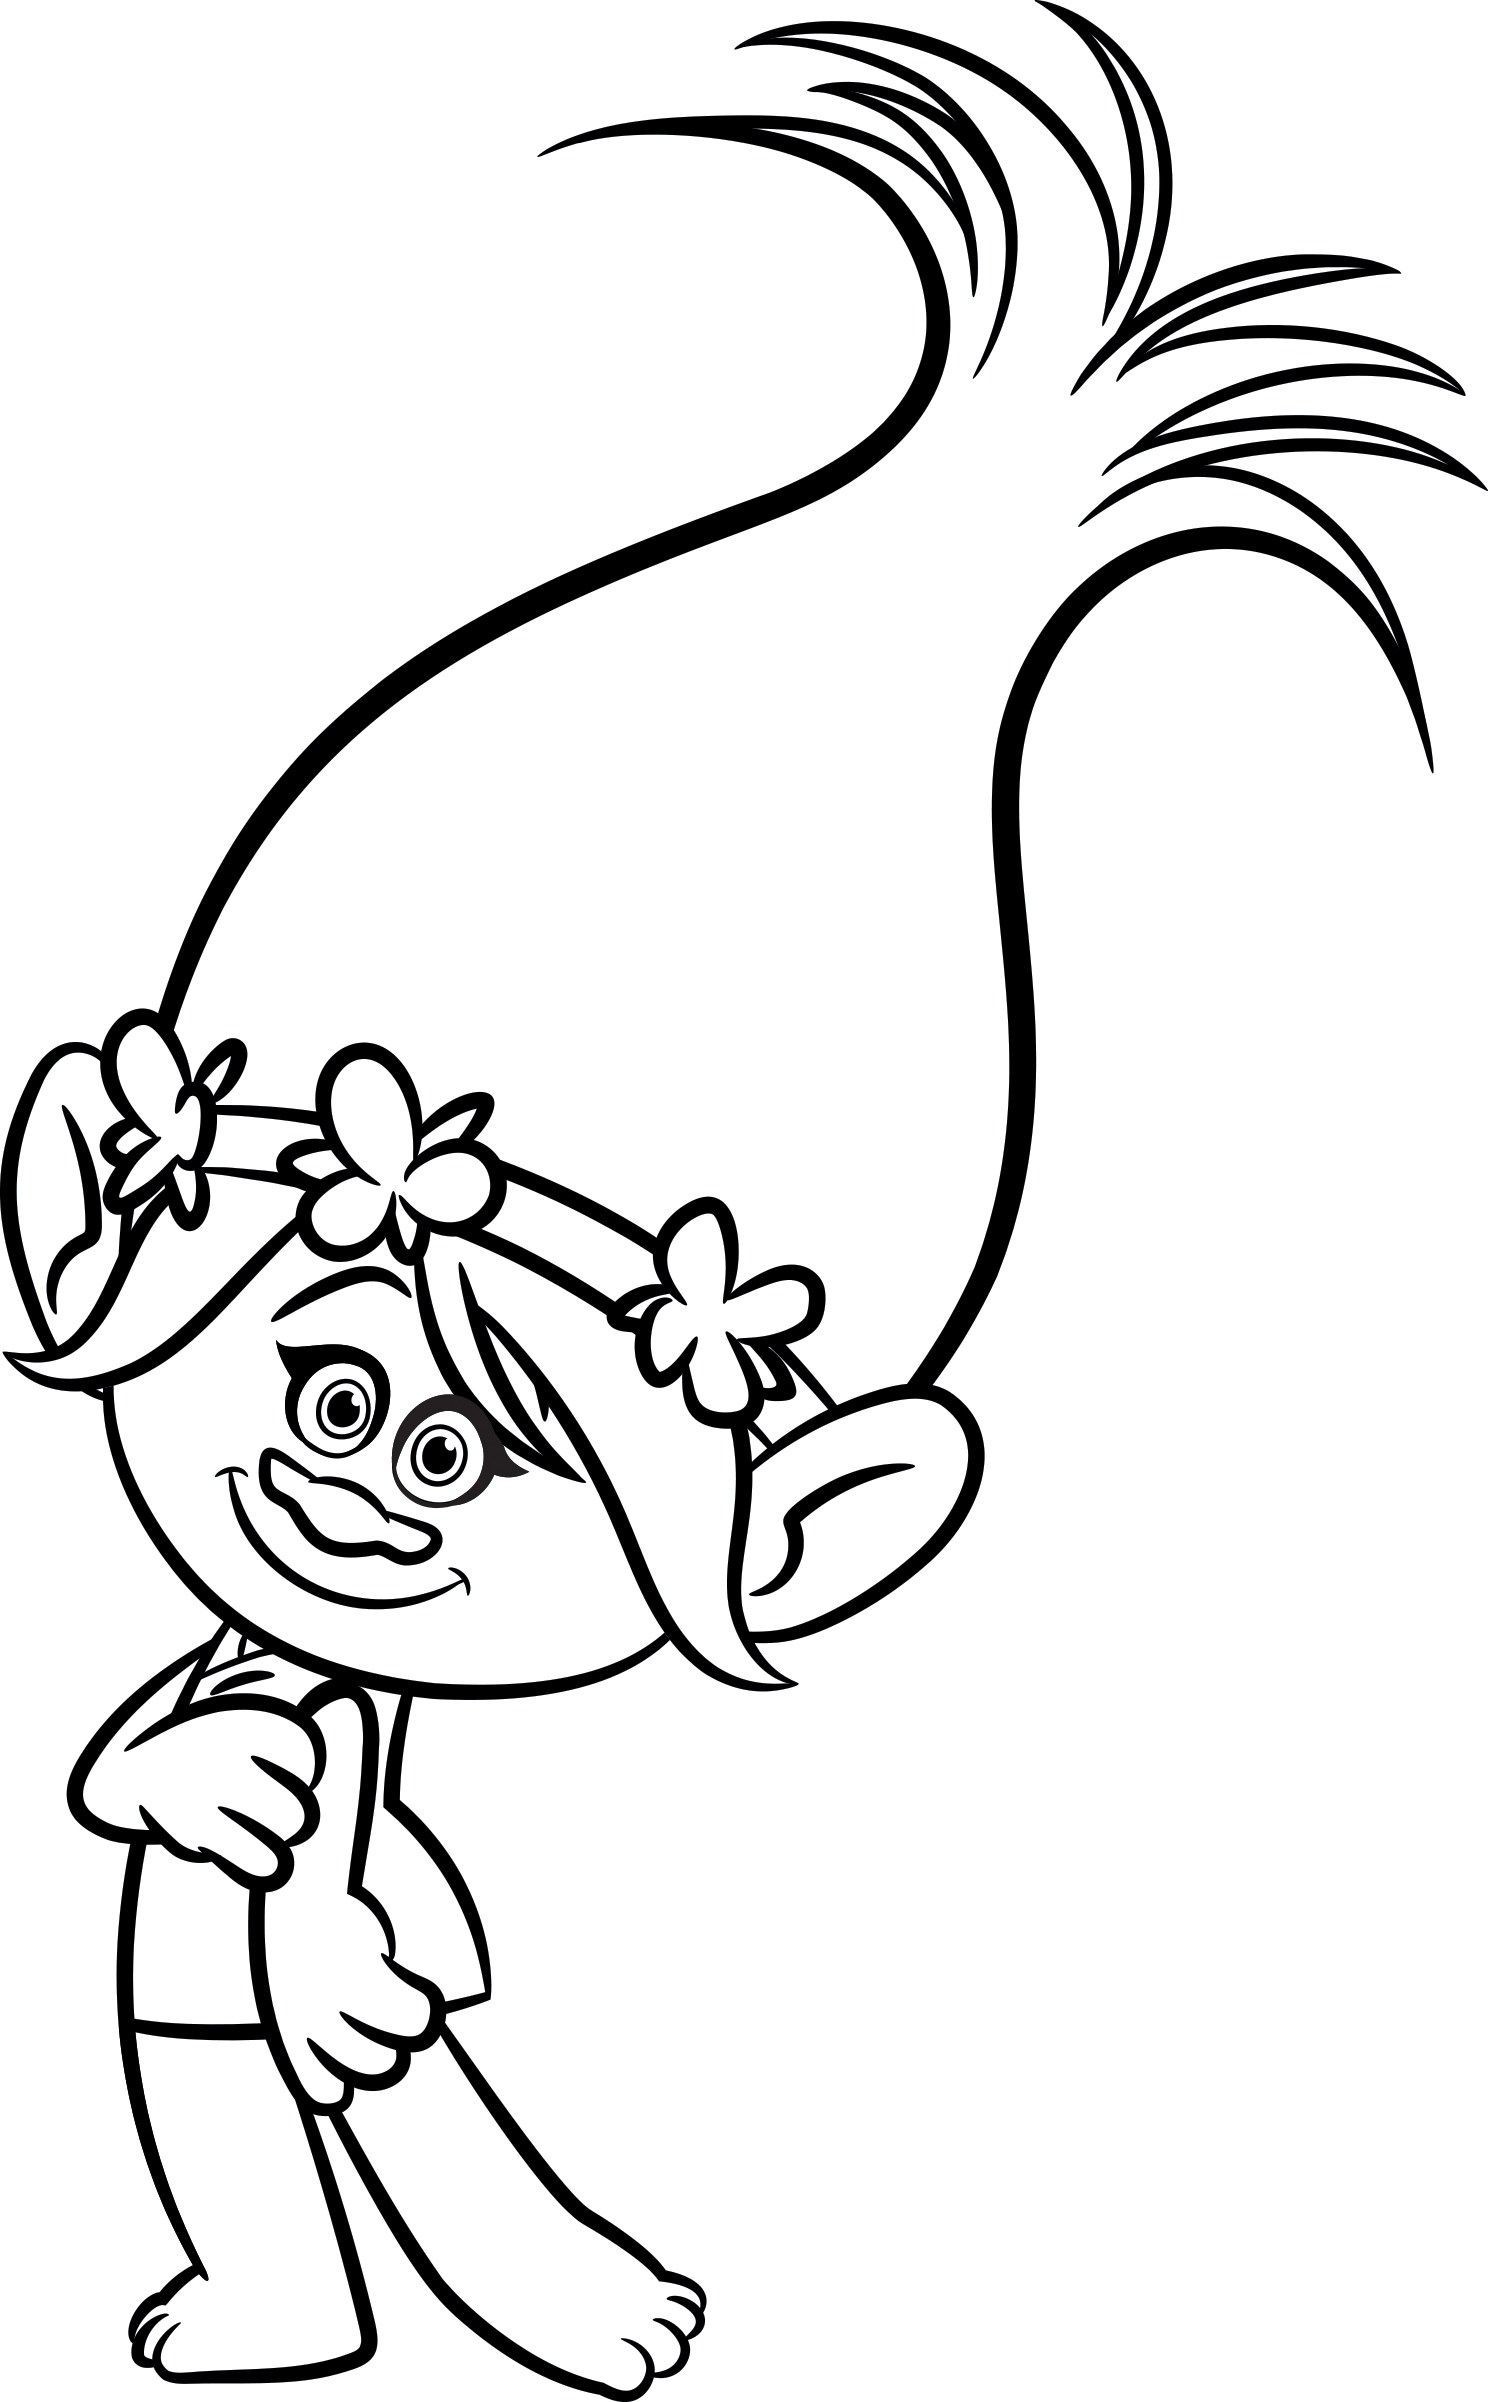 Trolls Black and White Coloring Pages Wallpaper